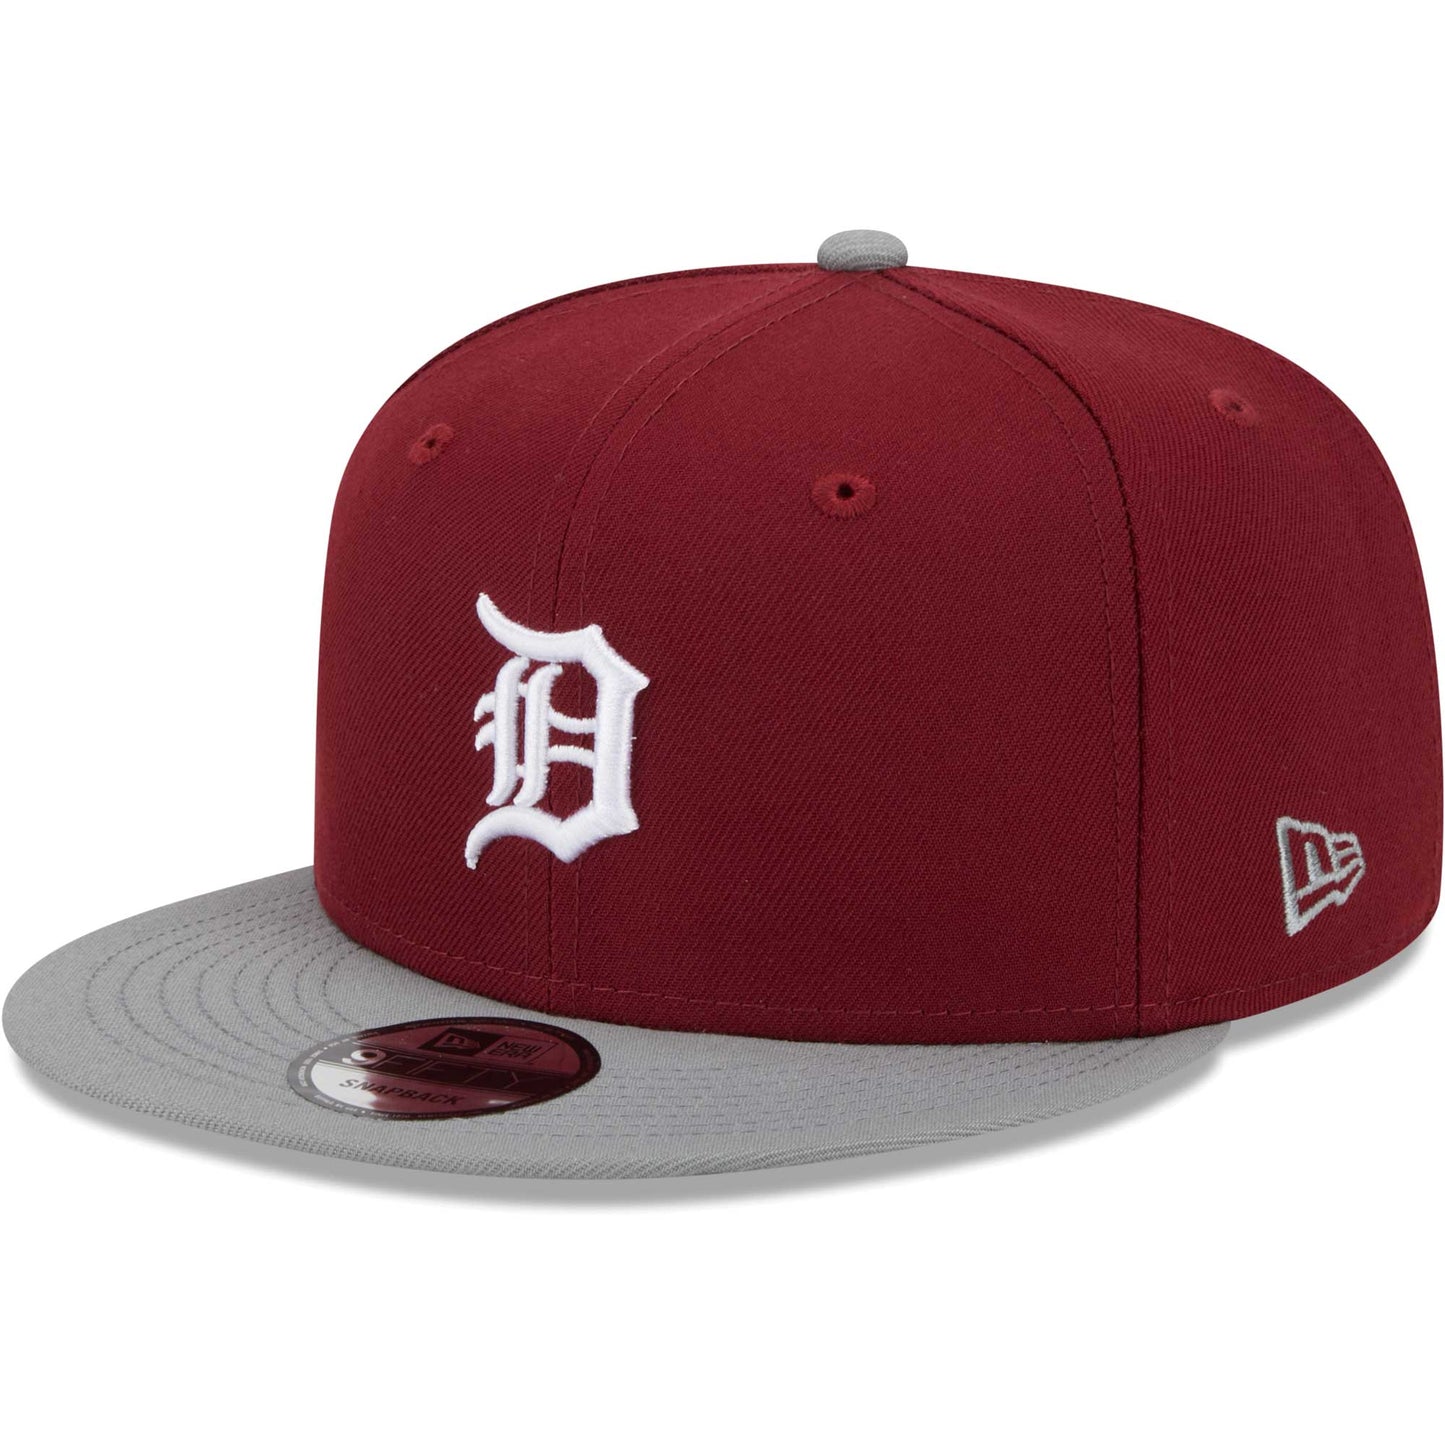 Detroit Tigers New Era Two-Tone Color Pack 9FIFTY Snapback Hat - Cardinal